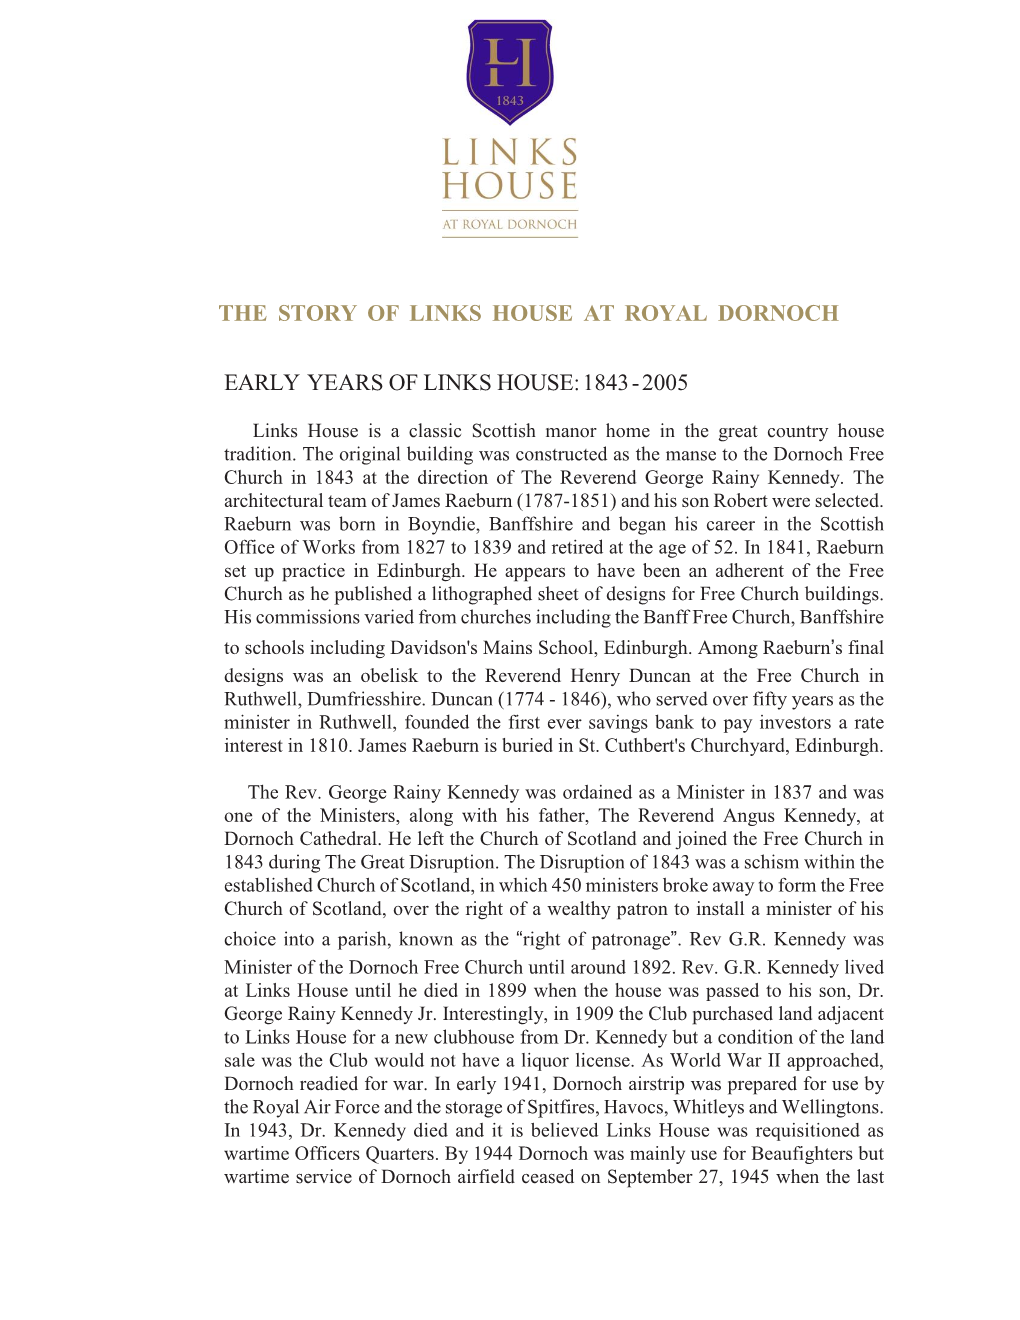 Download the Full Story of Links House